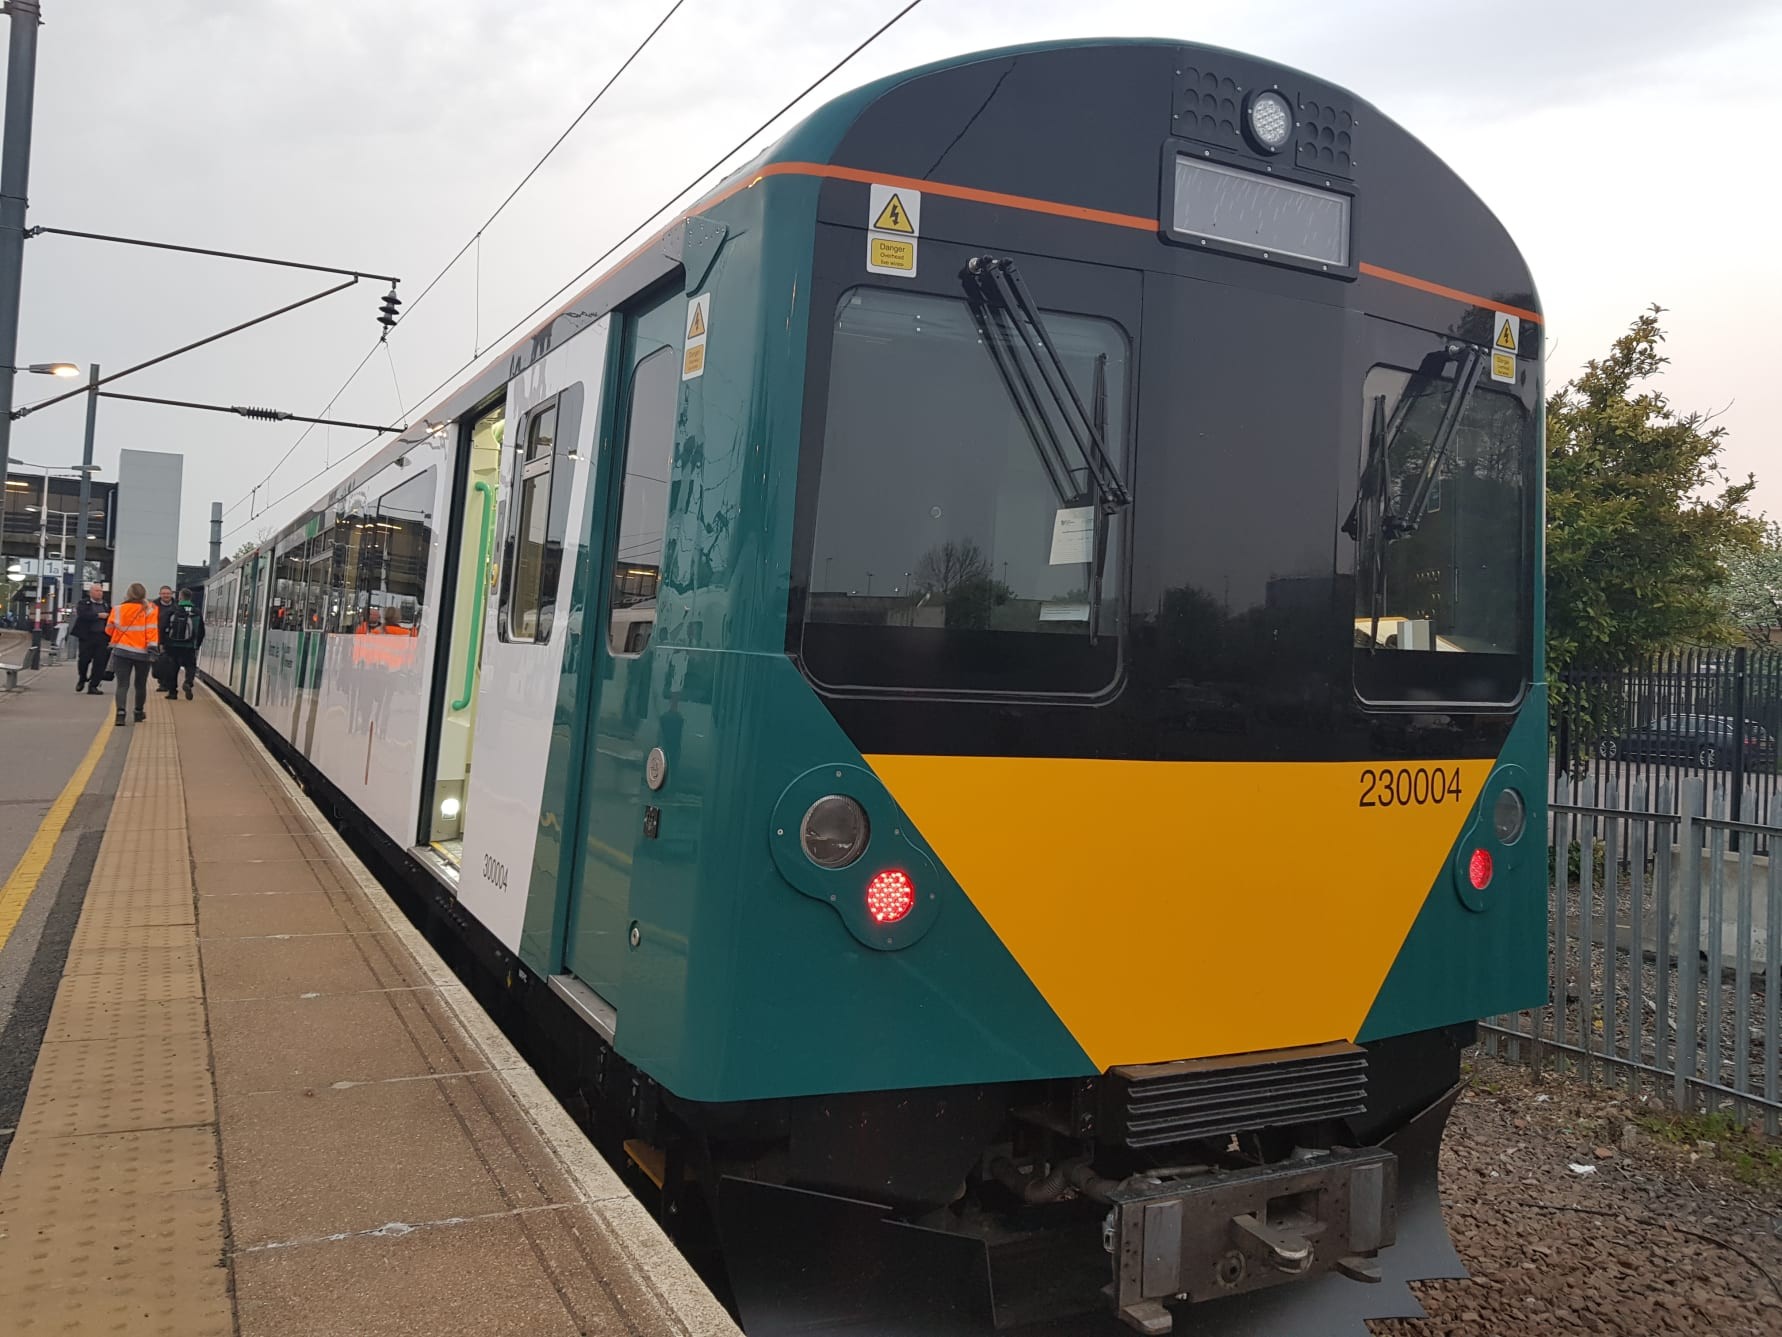 First Class 230 begins passenger services between Bletchley and Bedford